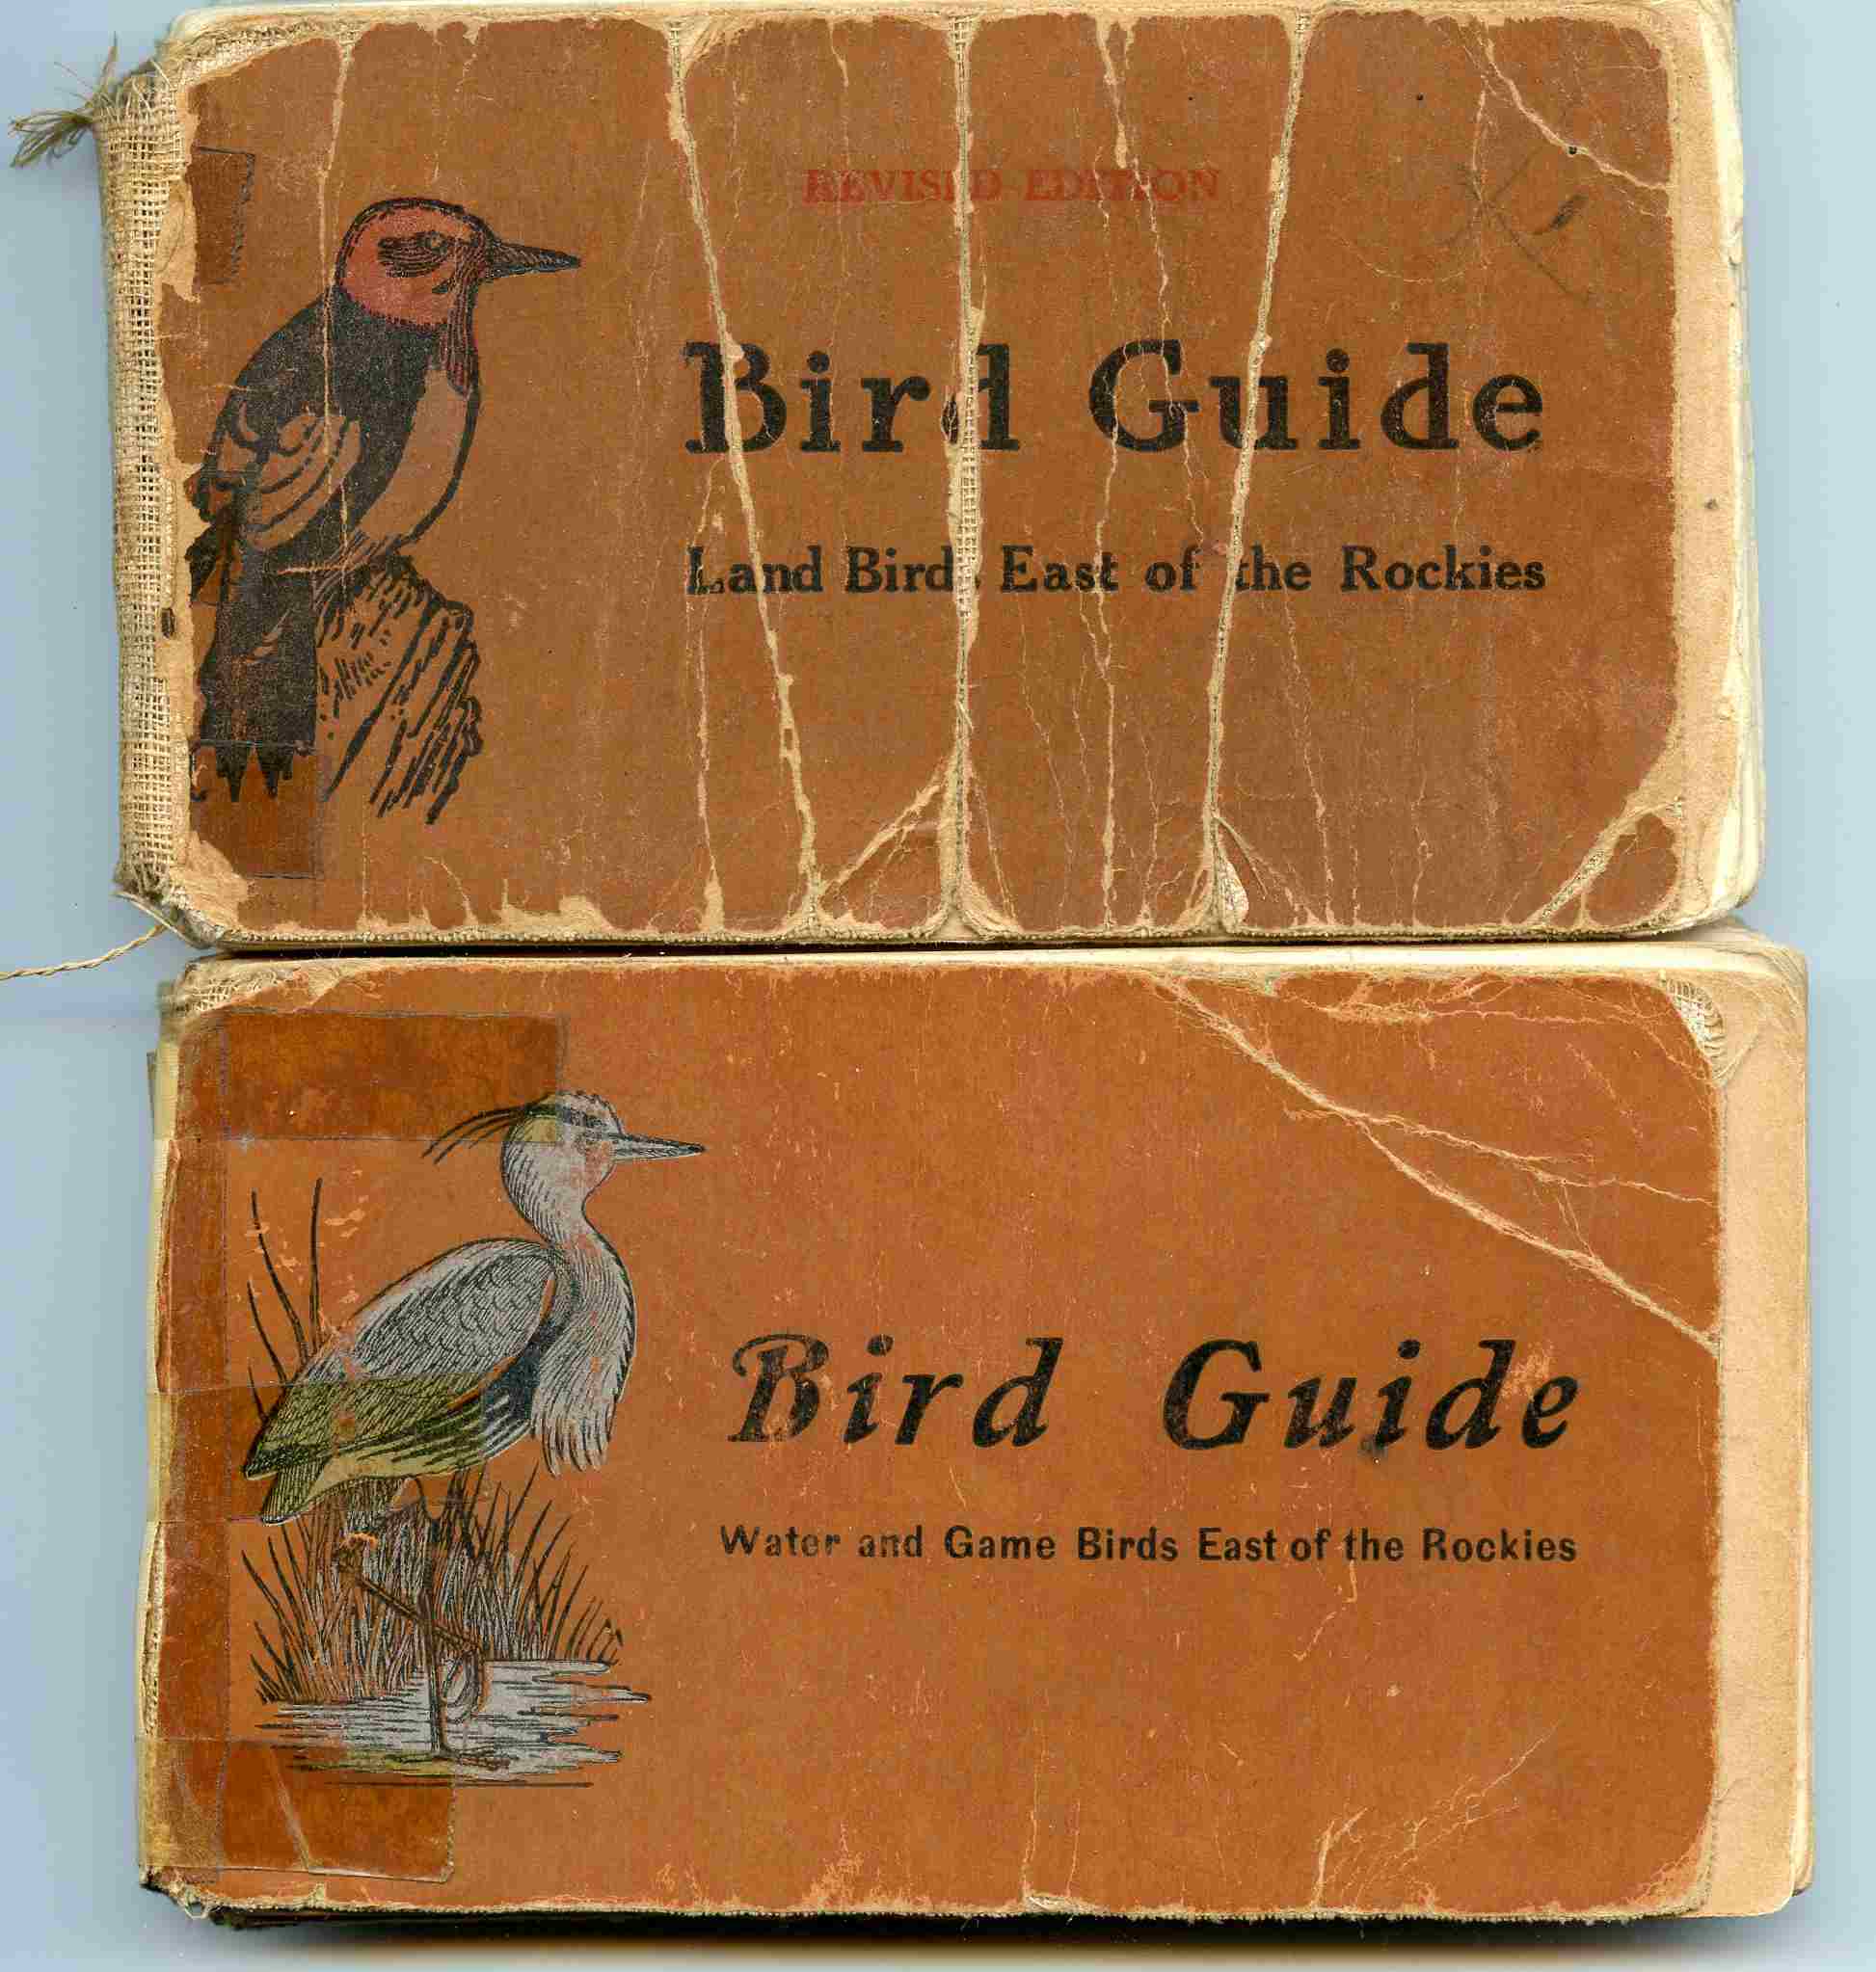 Covers of Reed guides